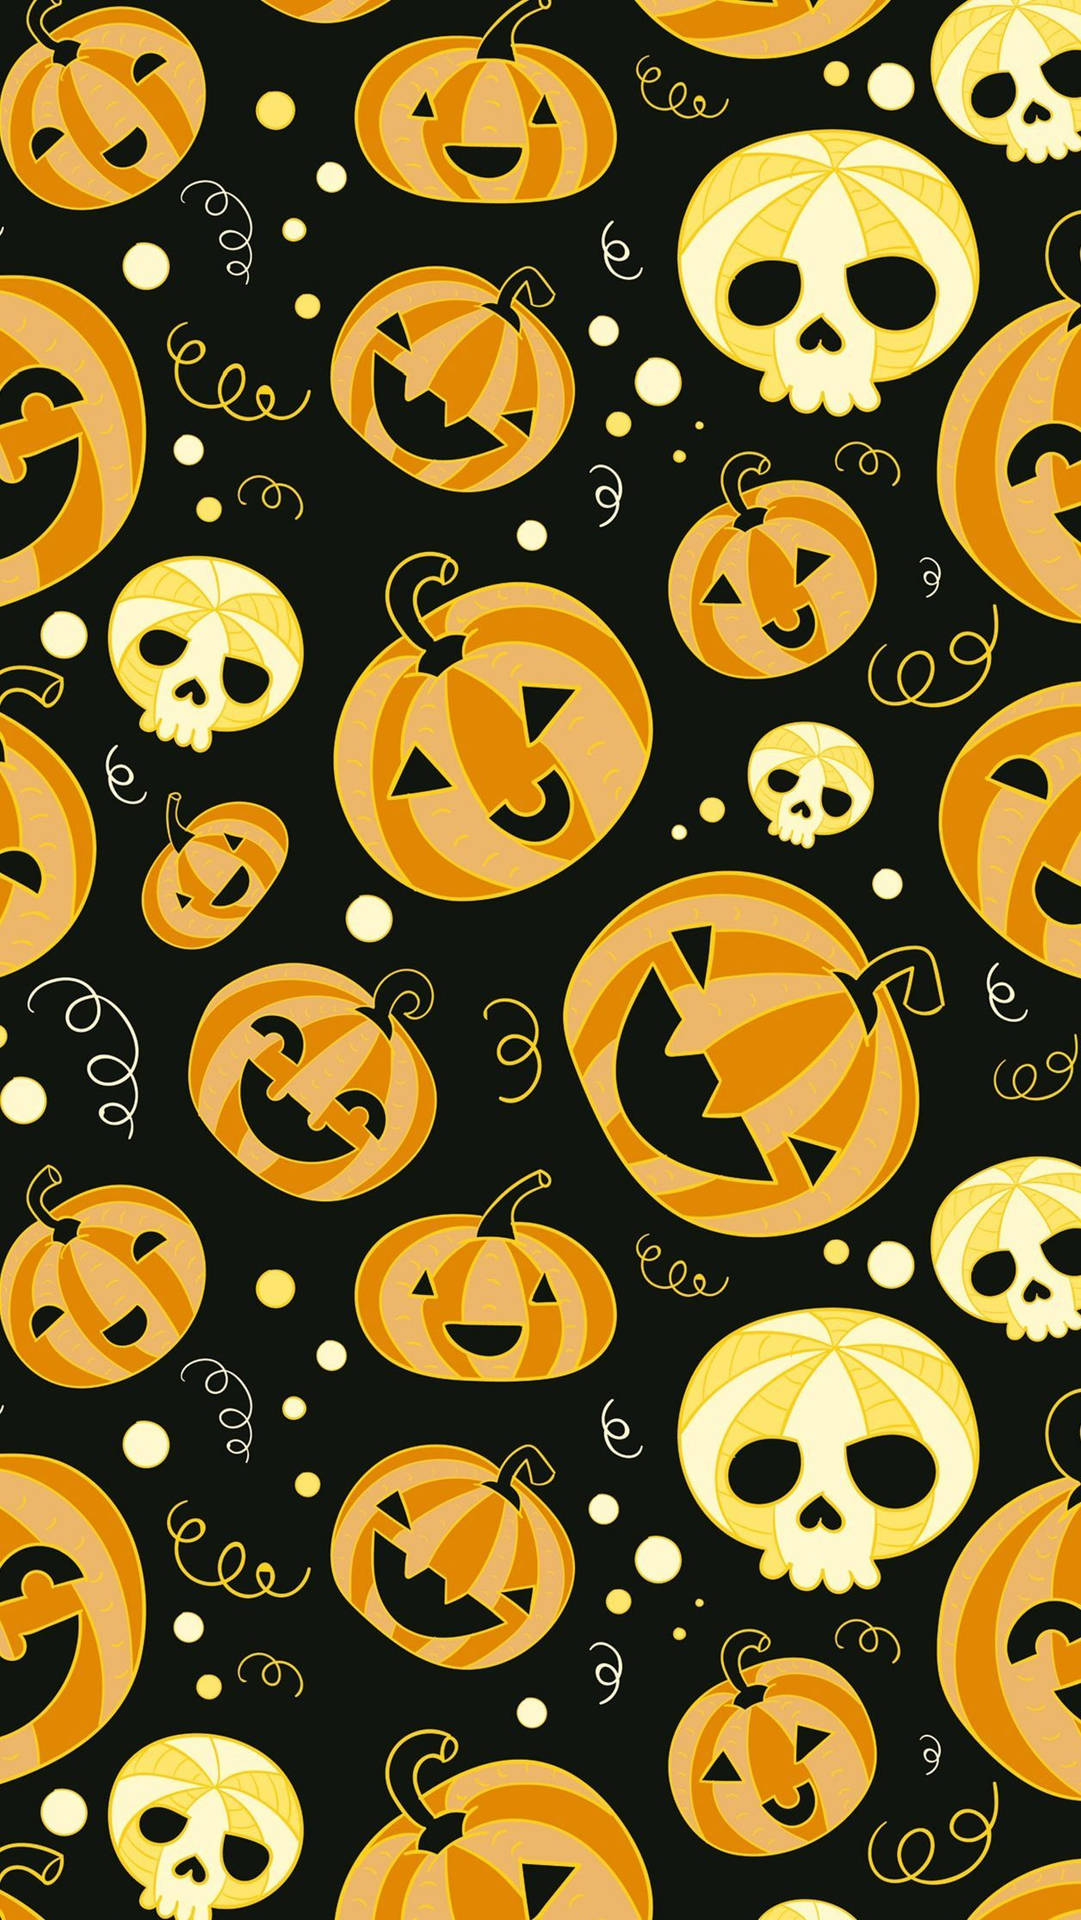 Get spooky this Halloween with a modern twist! Wallpaper